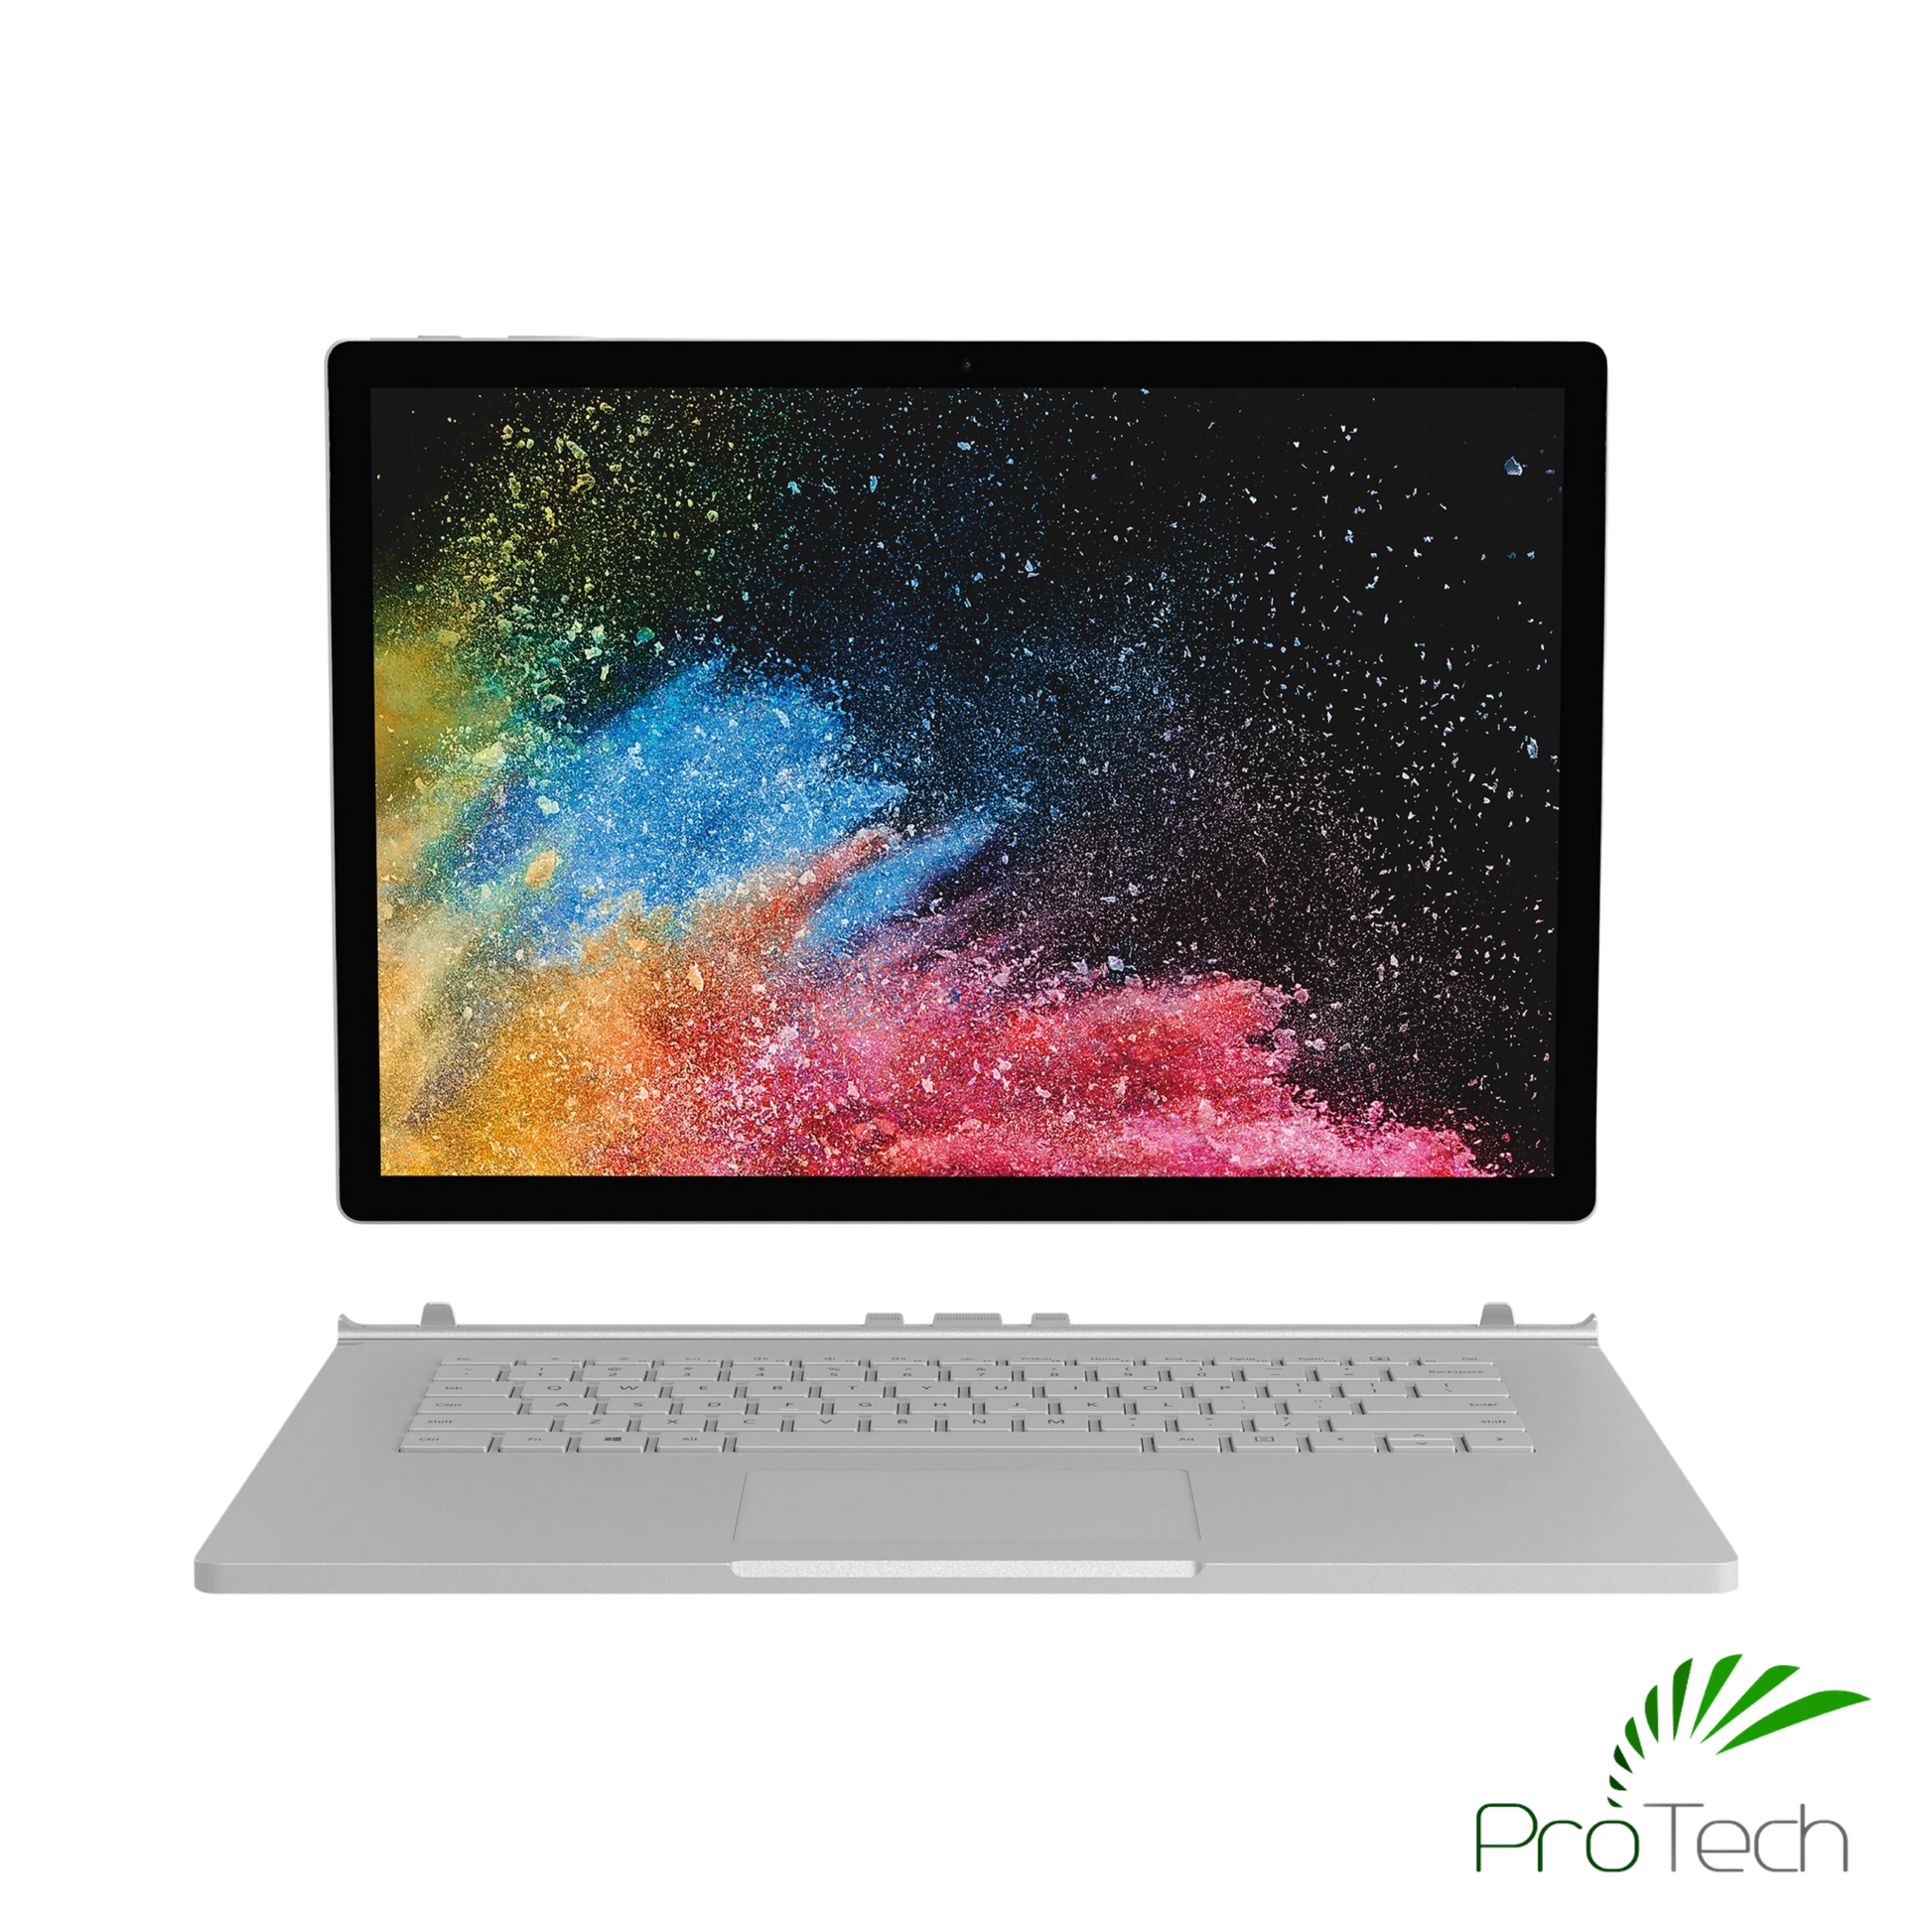 Microsoft Surface Book 2 13" | Core i5 | 8th Gen | 8GB RAM | 256GB SSD ProTech I.T. Solutions